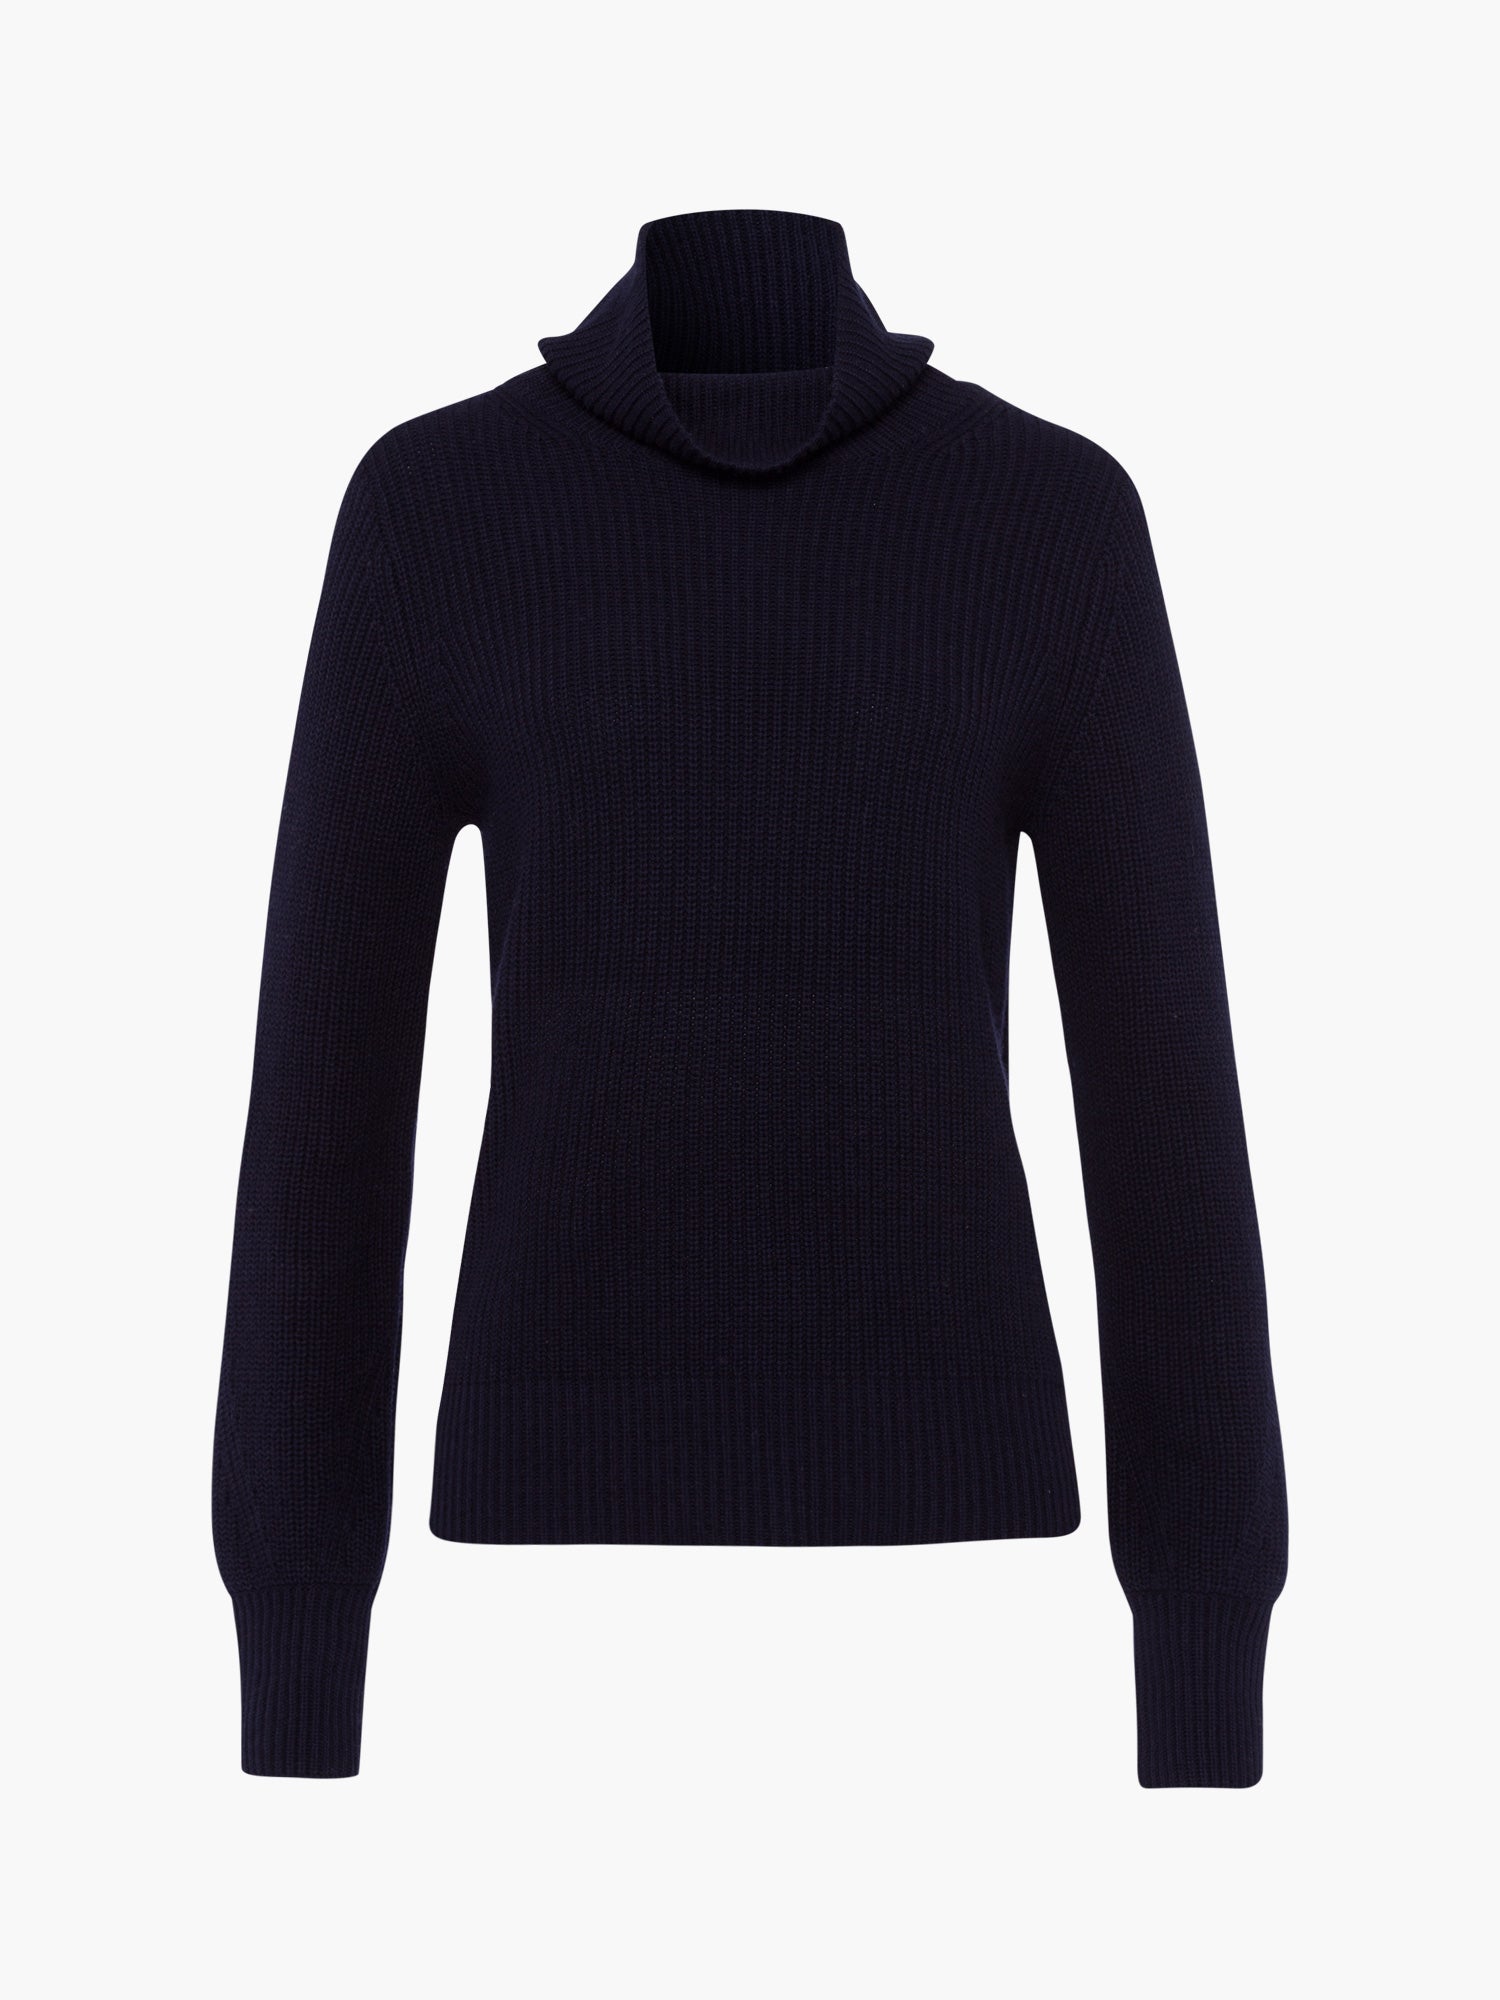 FTC-Cashmere-OUTLET-SALE-Pullover-Highneck-Strick-M-Blue-Space-ARCHIVE-COLLECTION.jpg